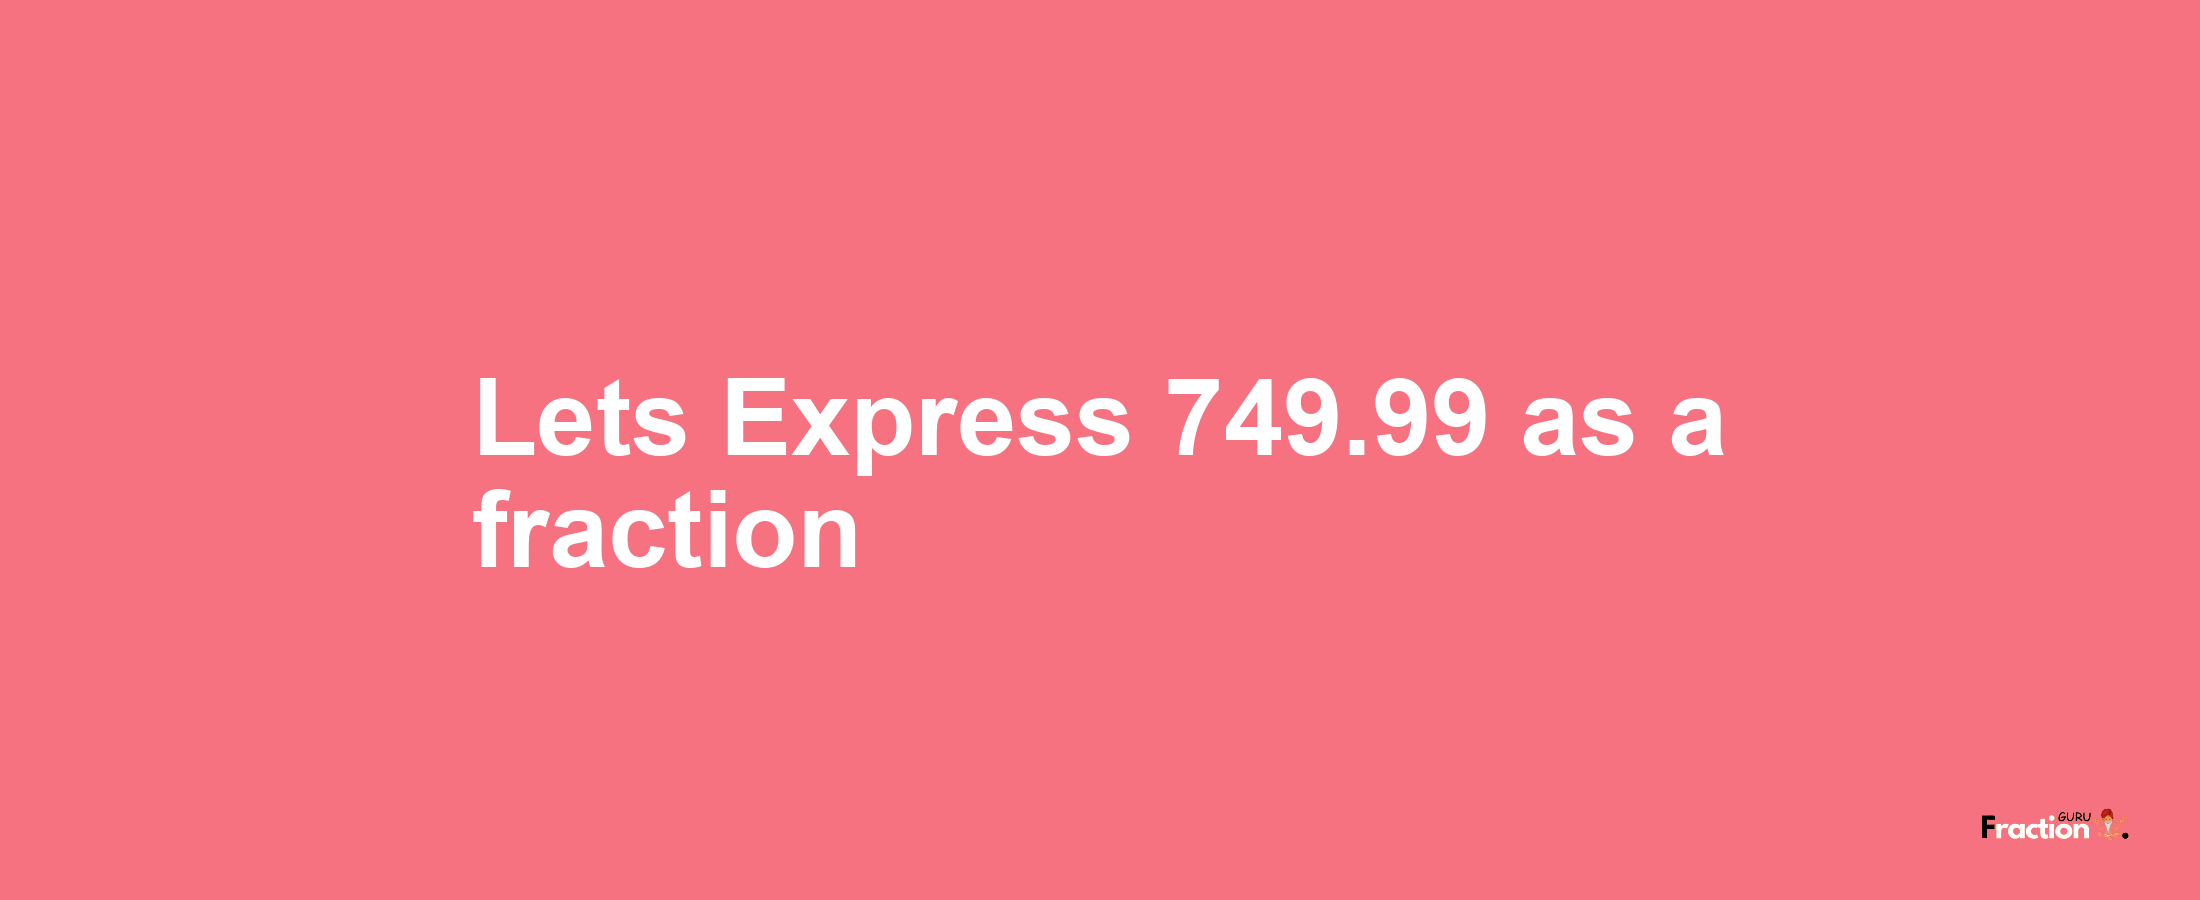 Lets Express 749.99 as afraction